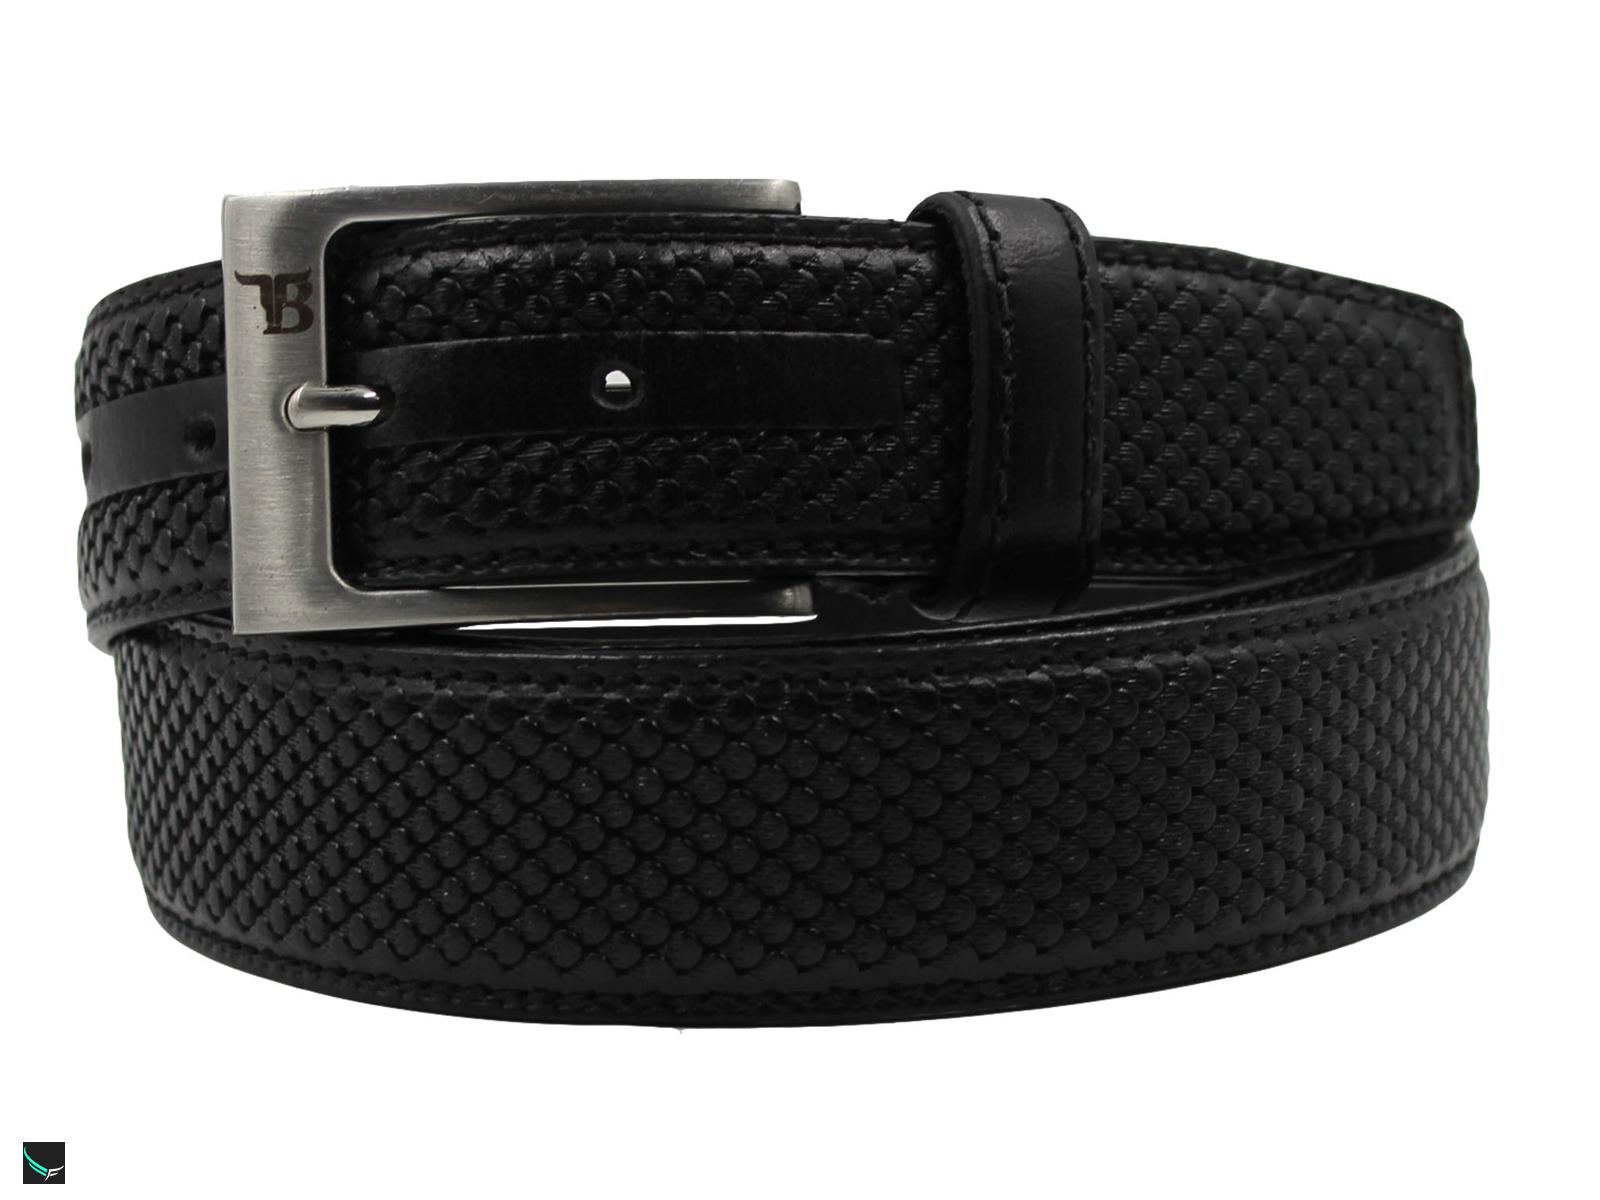 Fish Printed Leather Belt In Black - 4197 - Leather Collections On ...